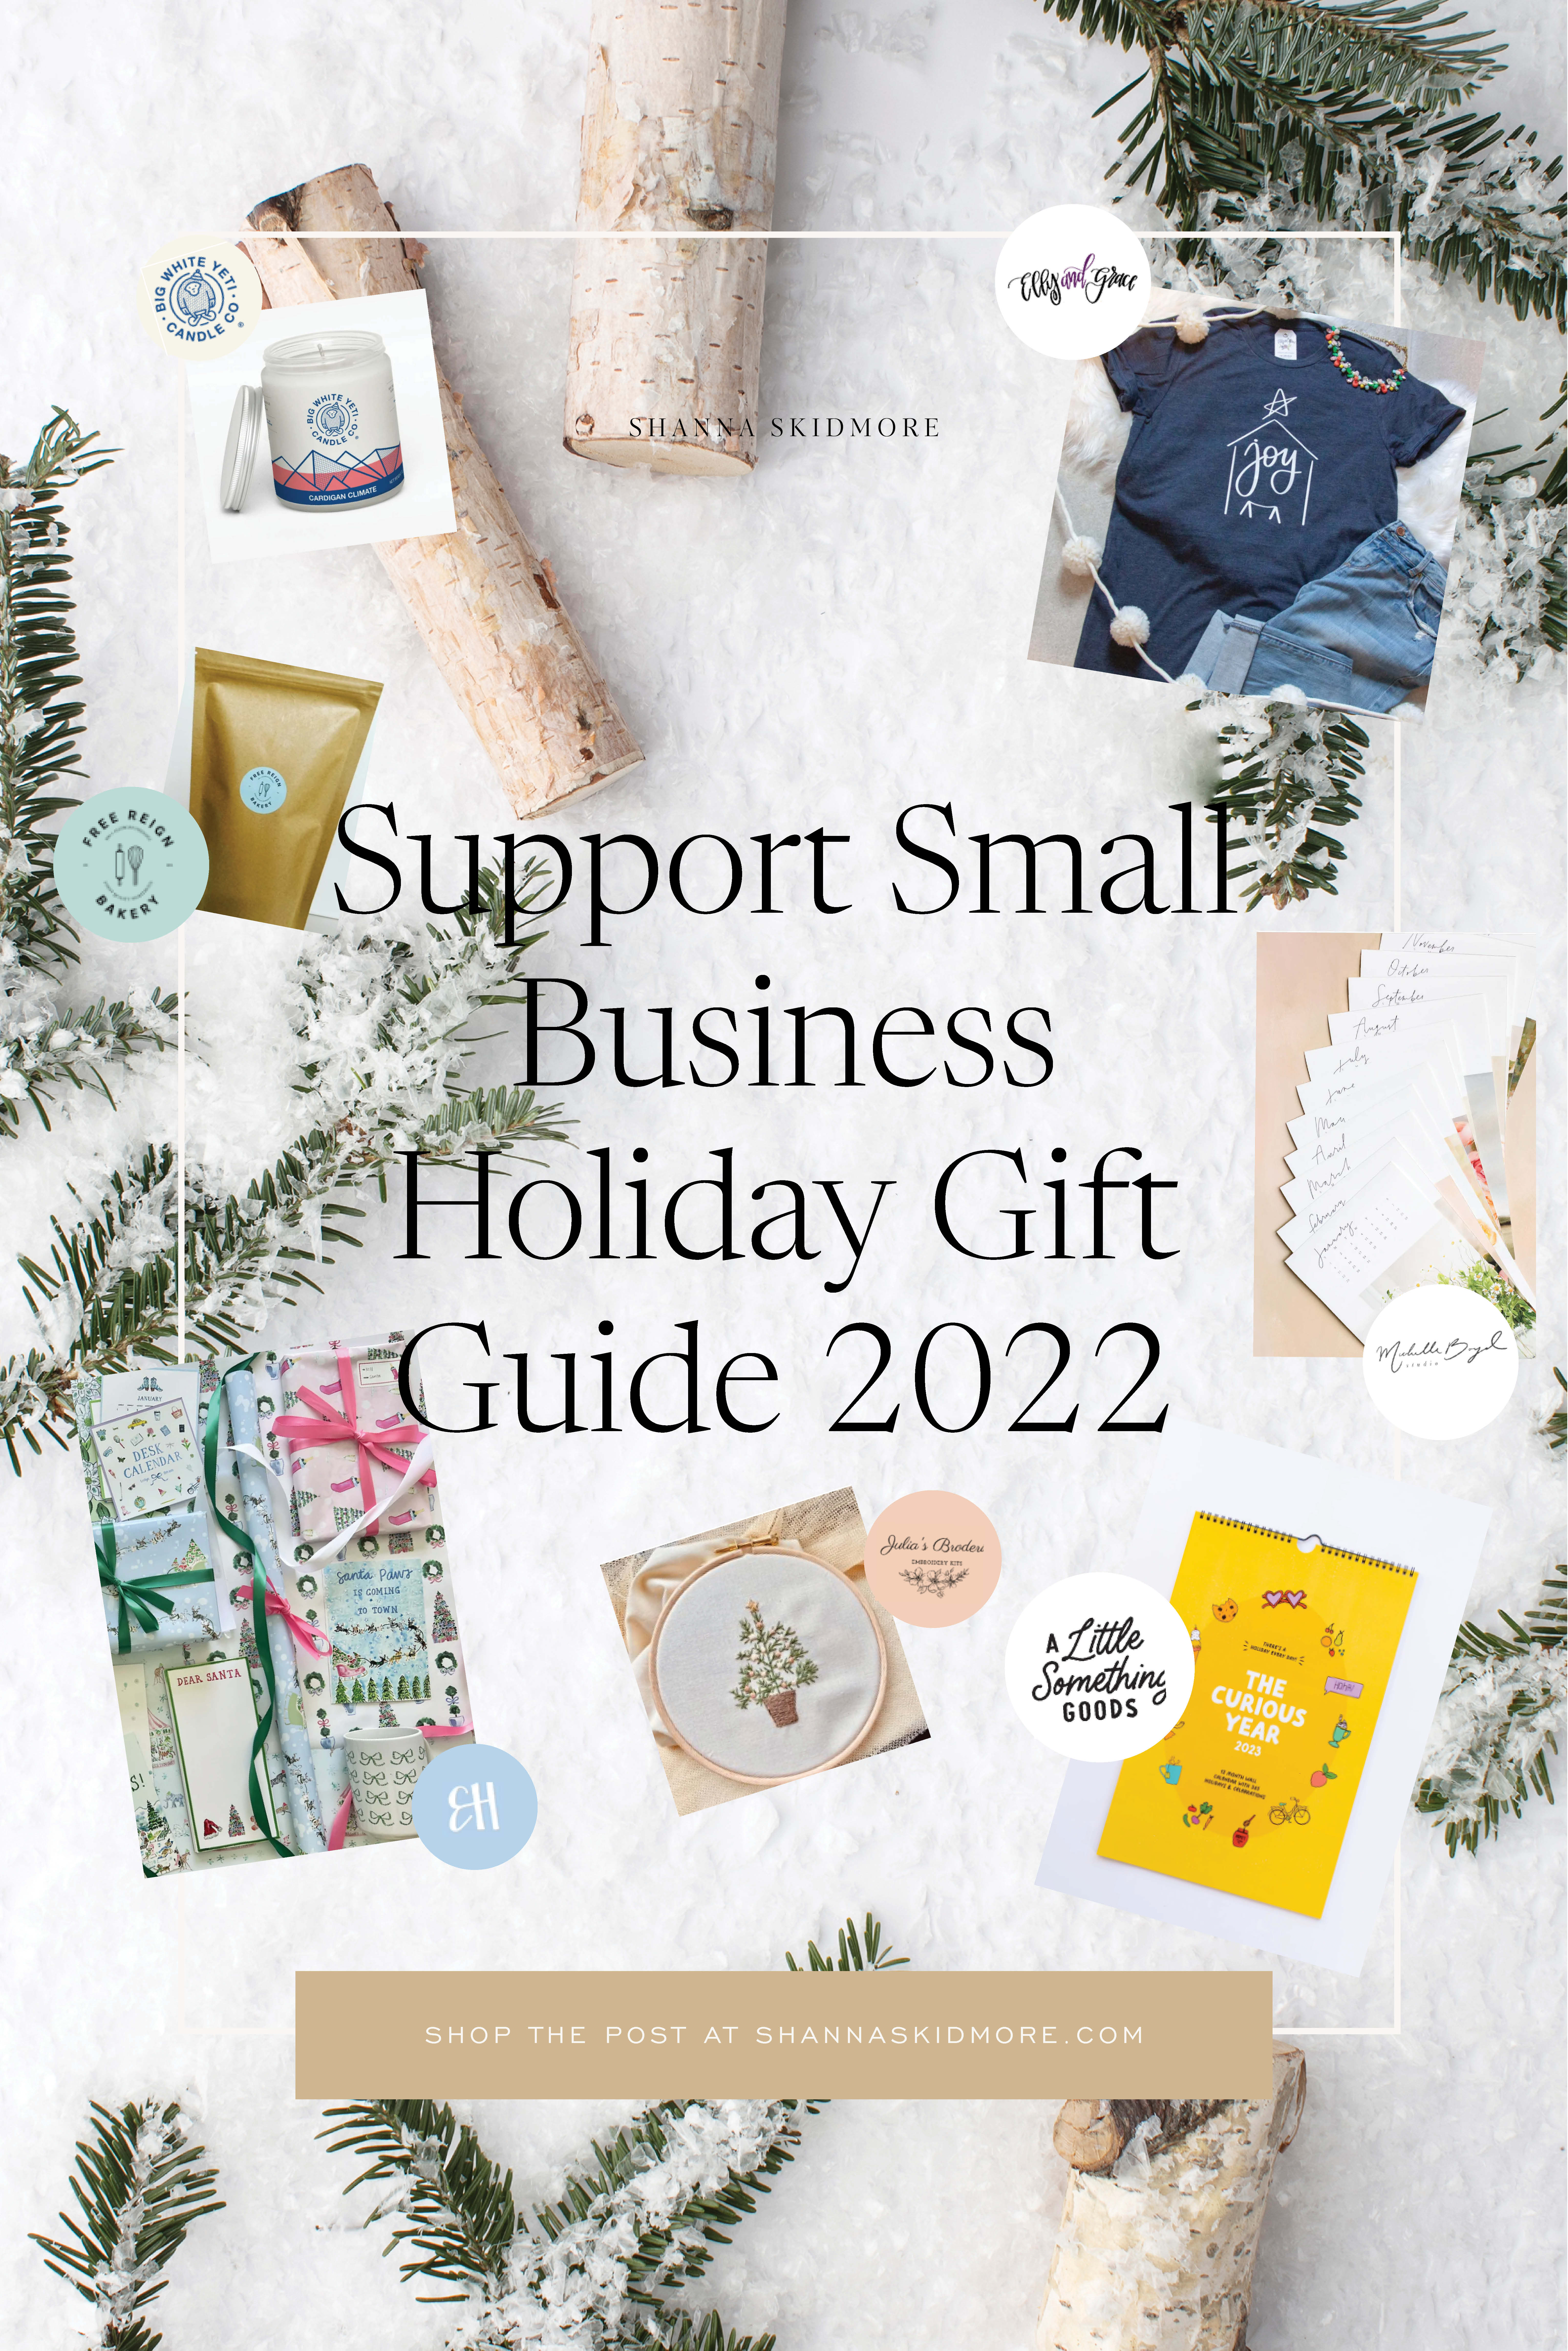 Presenting our 100% entirely Small Business Holiday Gift Guide